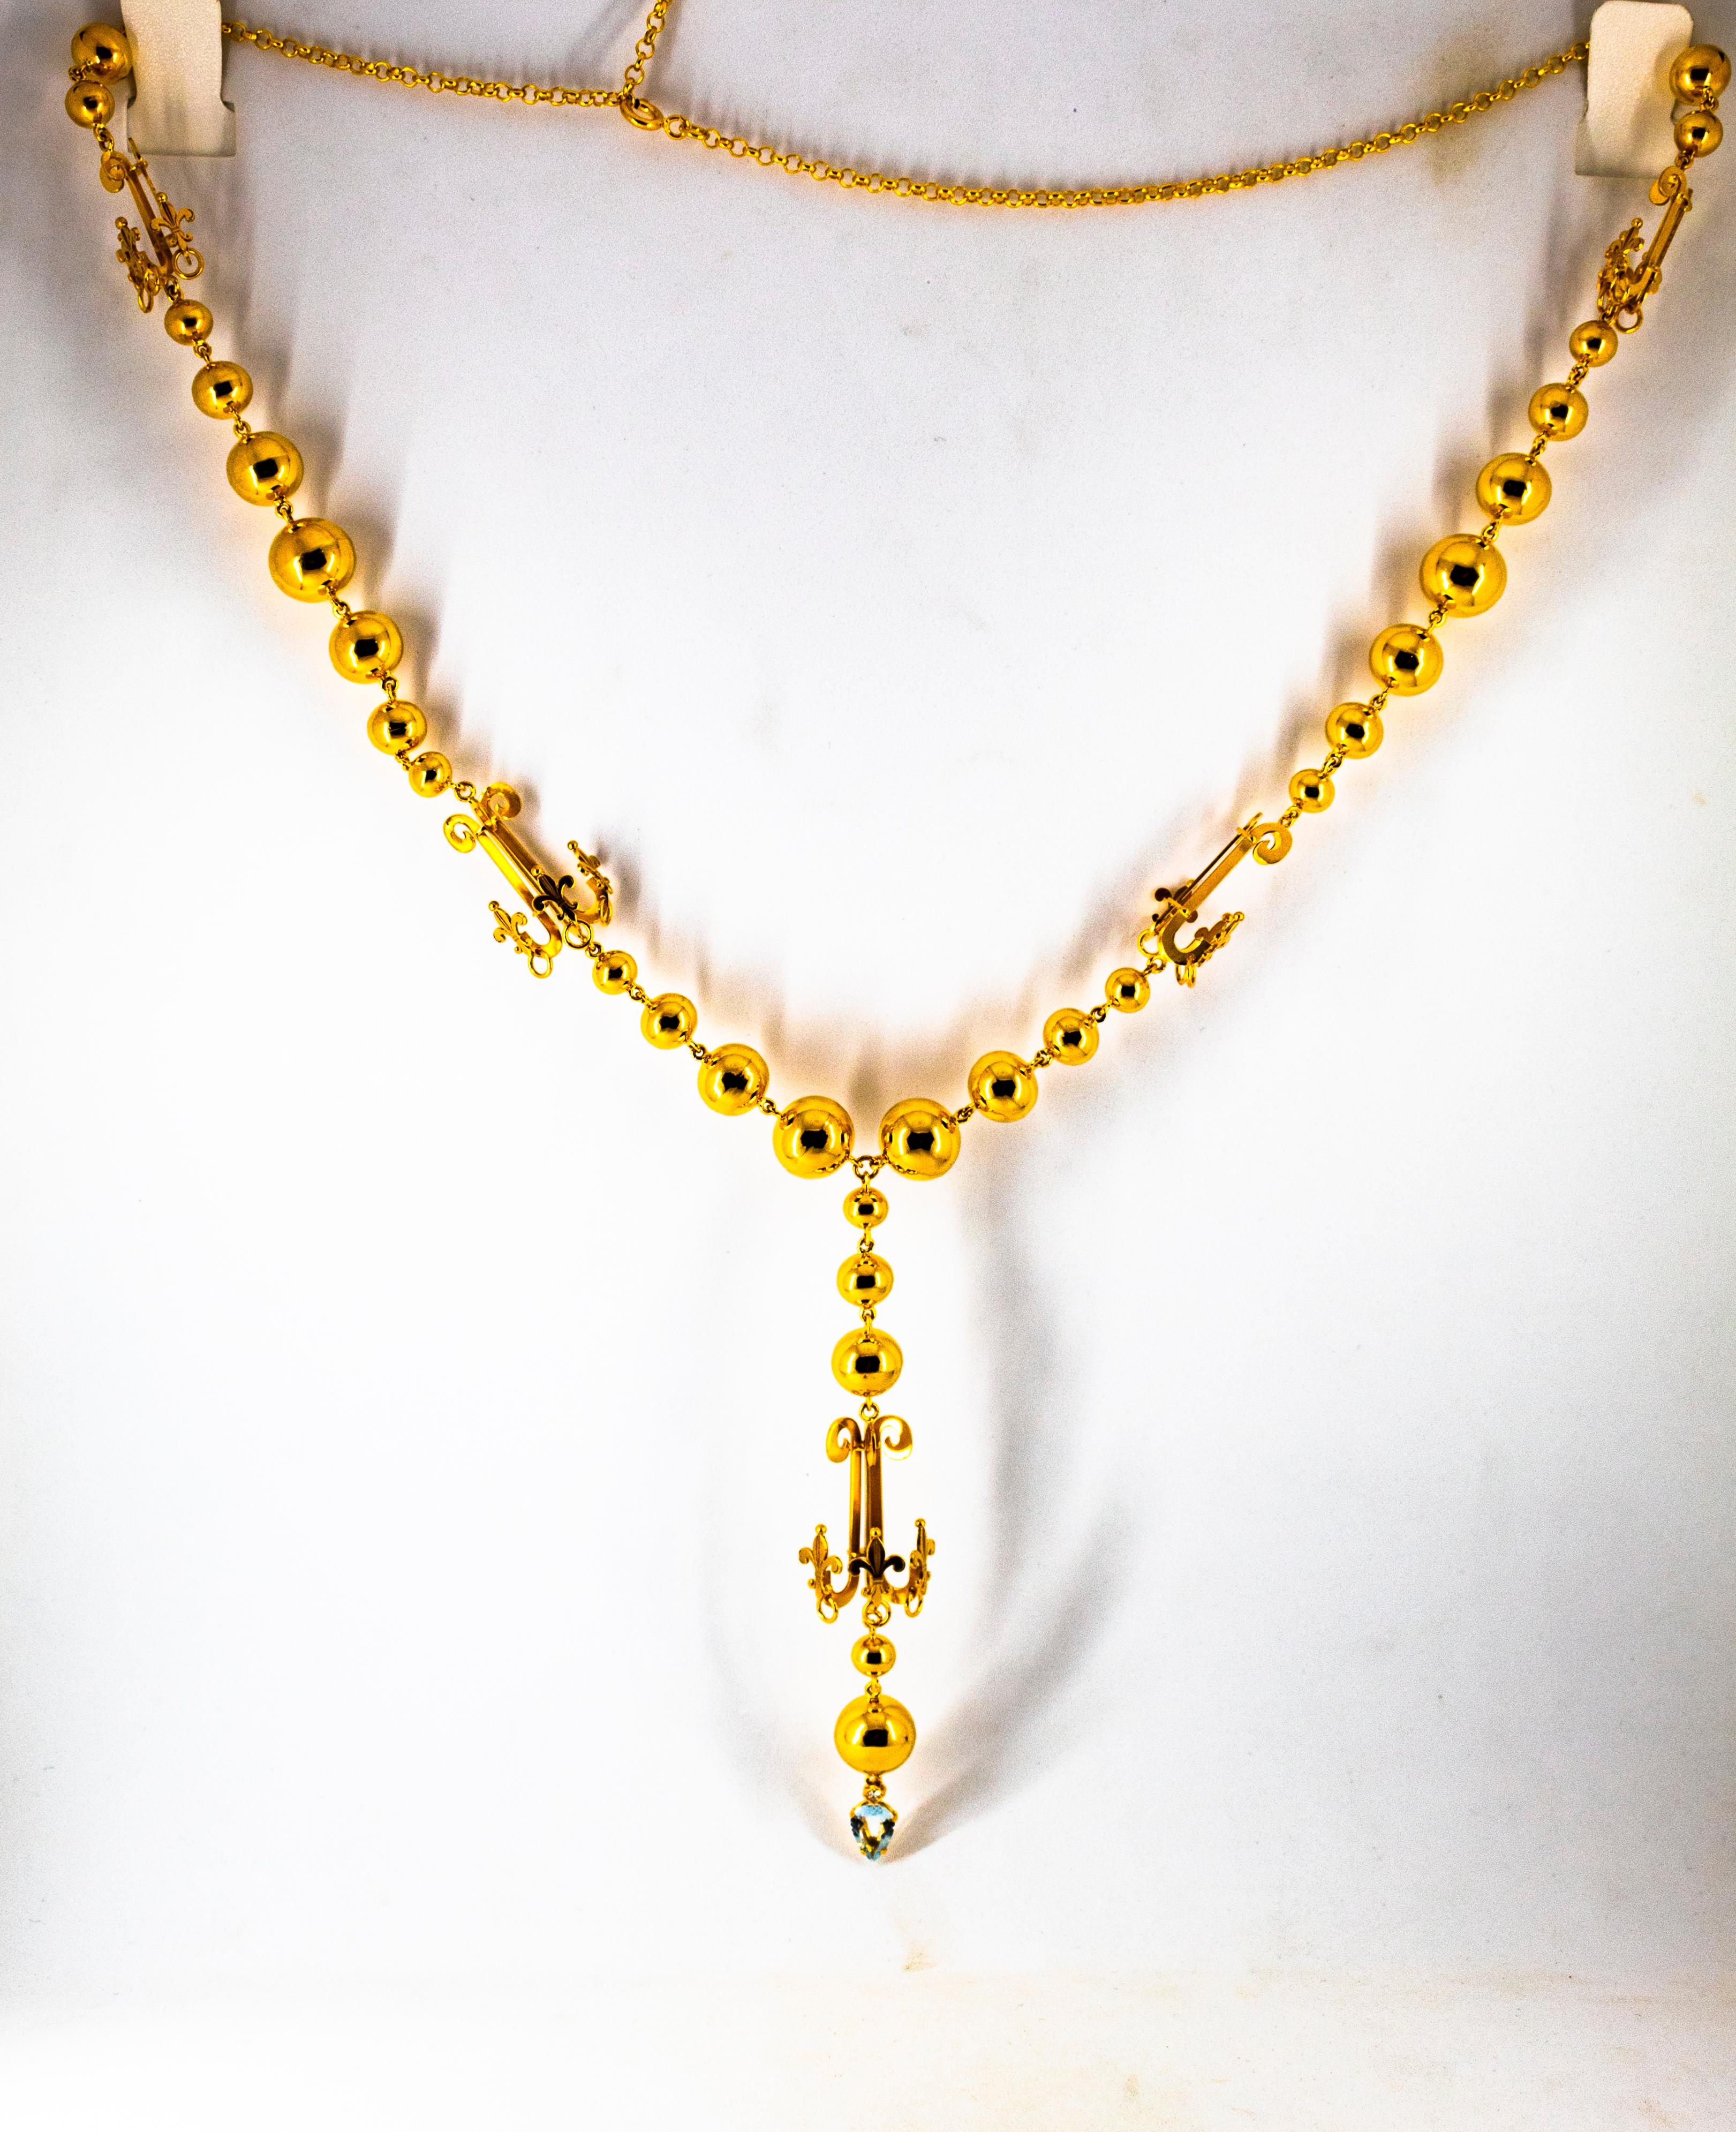 This Necklace is made of 9K Yellow Gold.
This Necklace has a 0.02 Carats White Diamonds.
This Necklace has a 1.20 Carats Aquamarine.
This Necklace is inspired by Renaissance Movement.
The Necklace Length is 75cm.
We're a workshop so every piece is